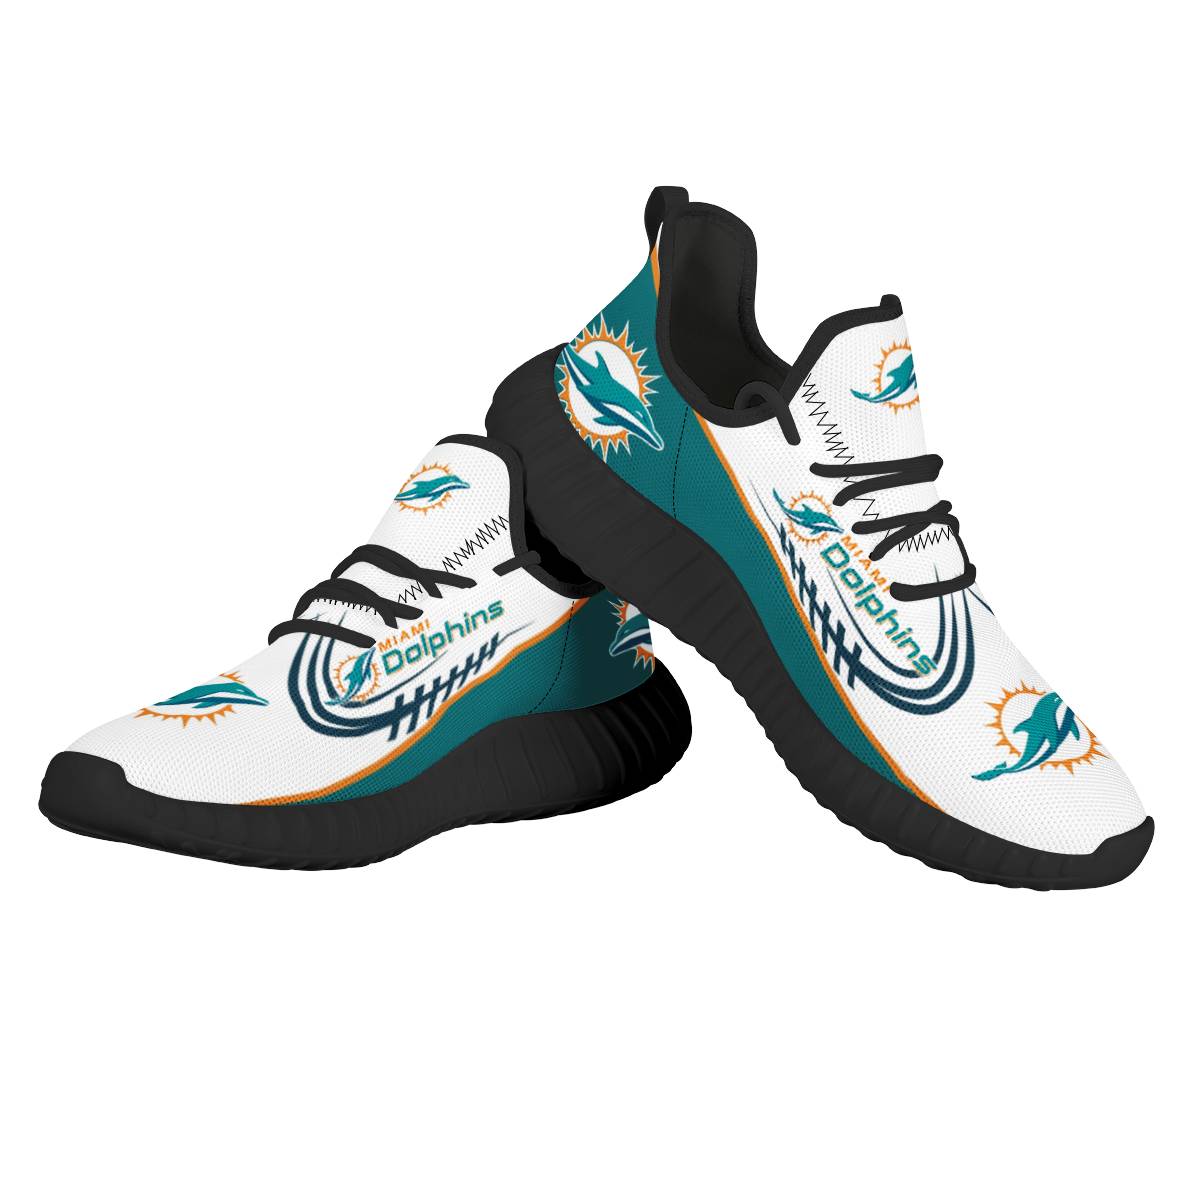 Women's NFL Miami Dolphins Mesh Knit Sneakers/Shoes 001